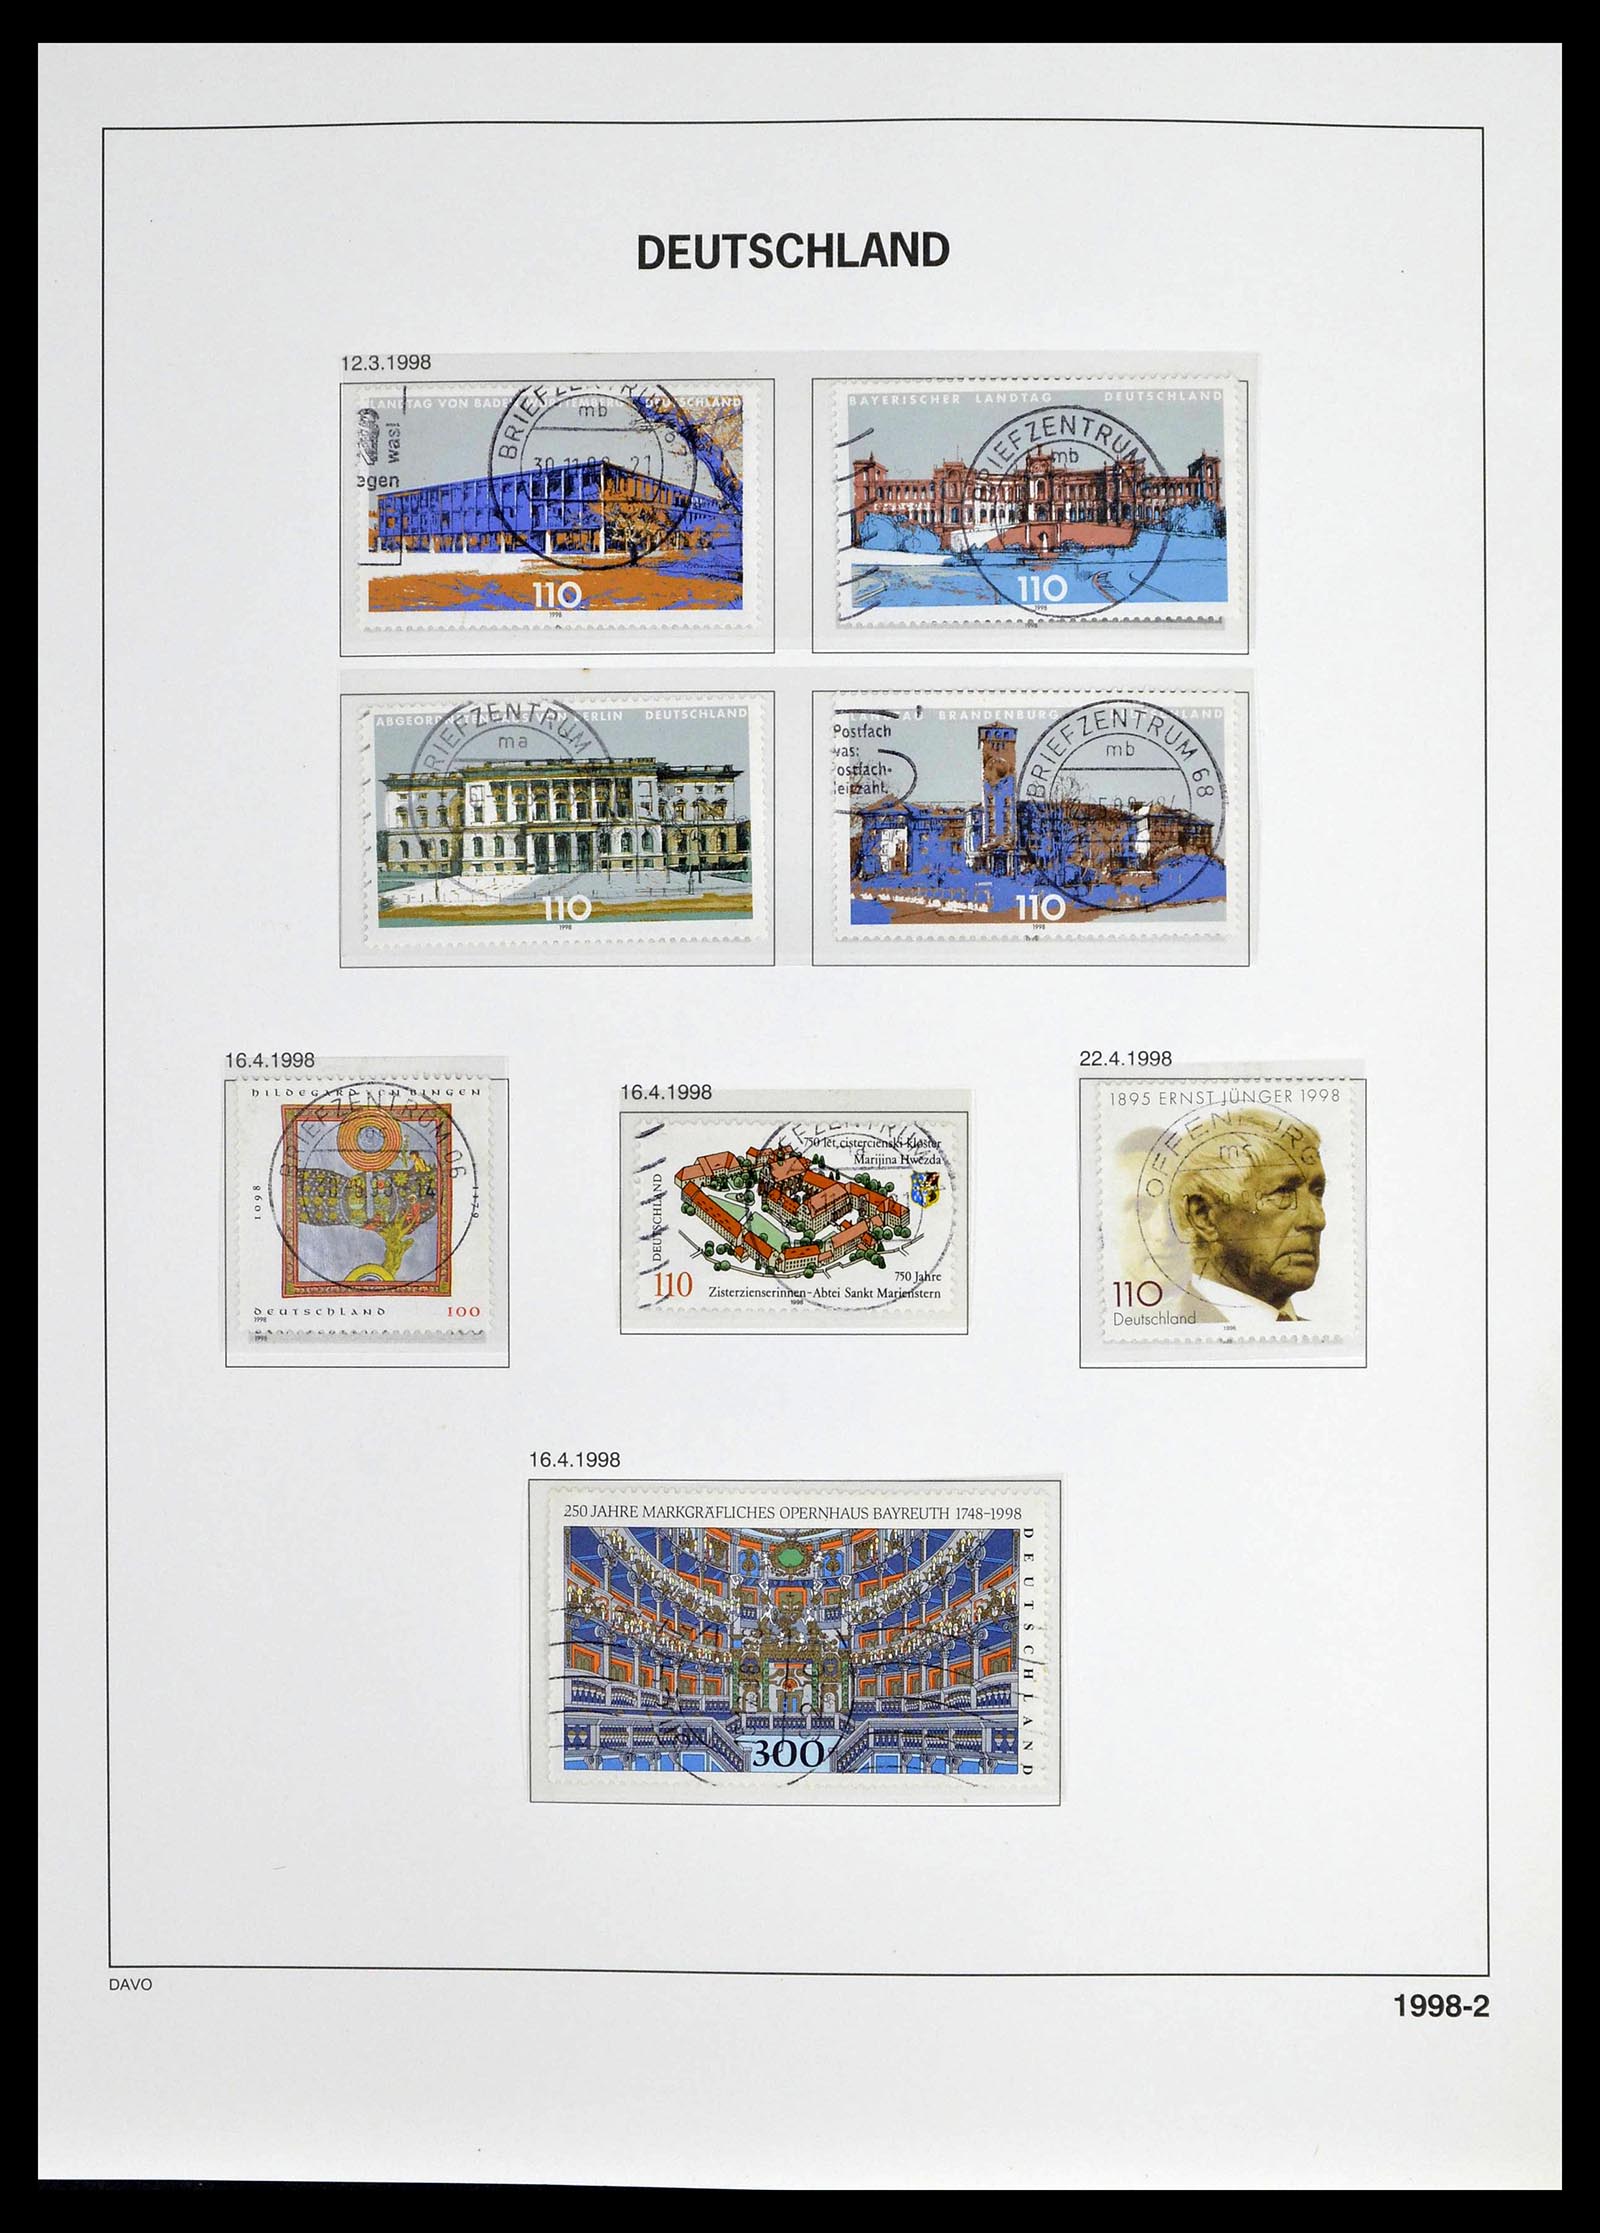 39326 0182 - Stamp collection 39326 Bundespost 1949-2003.